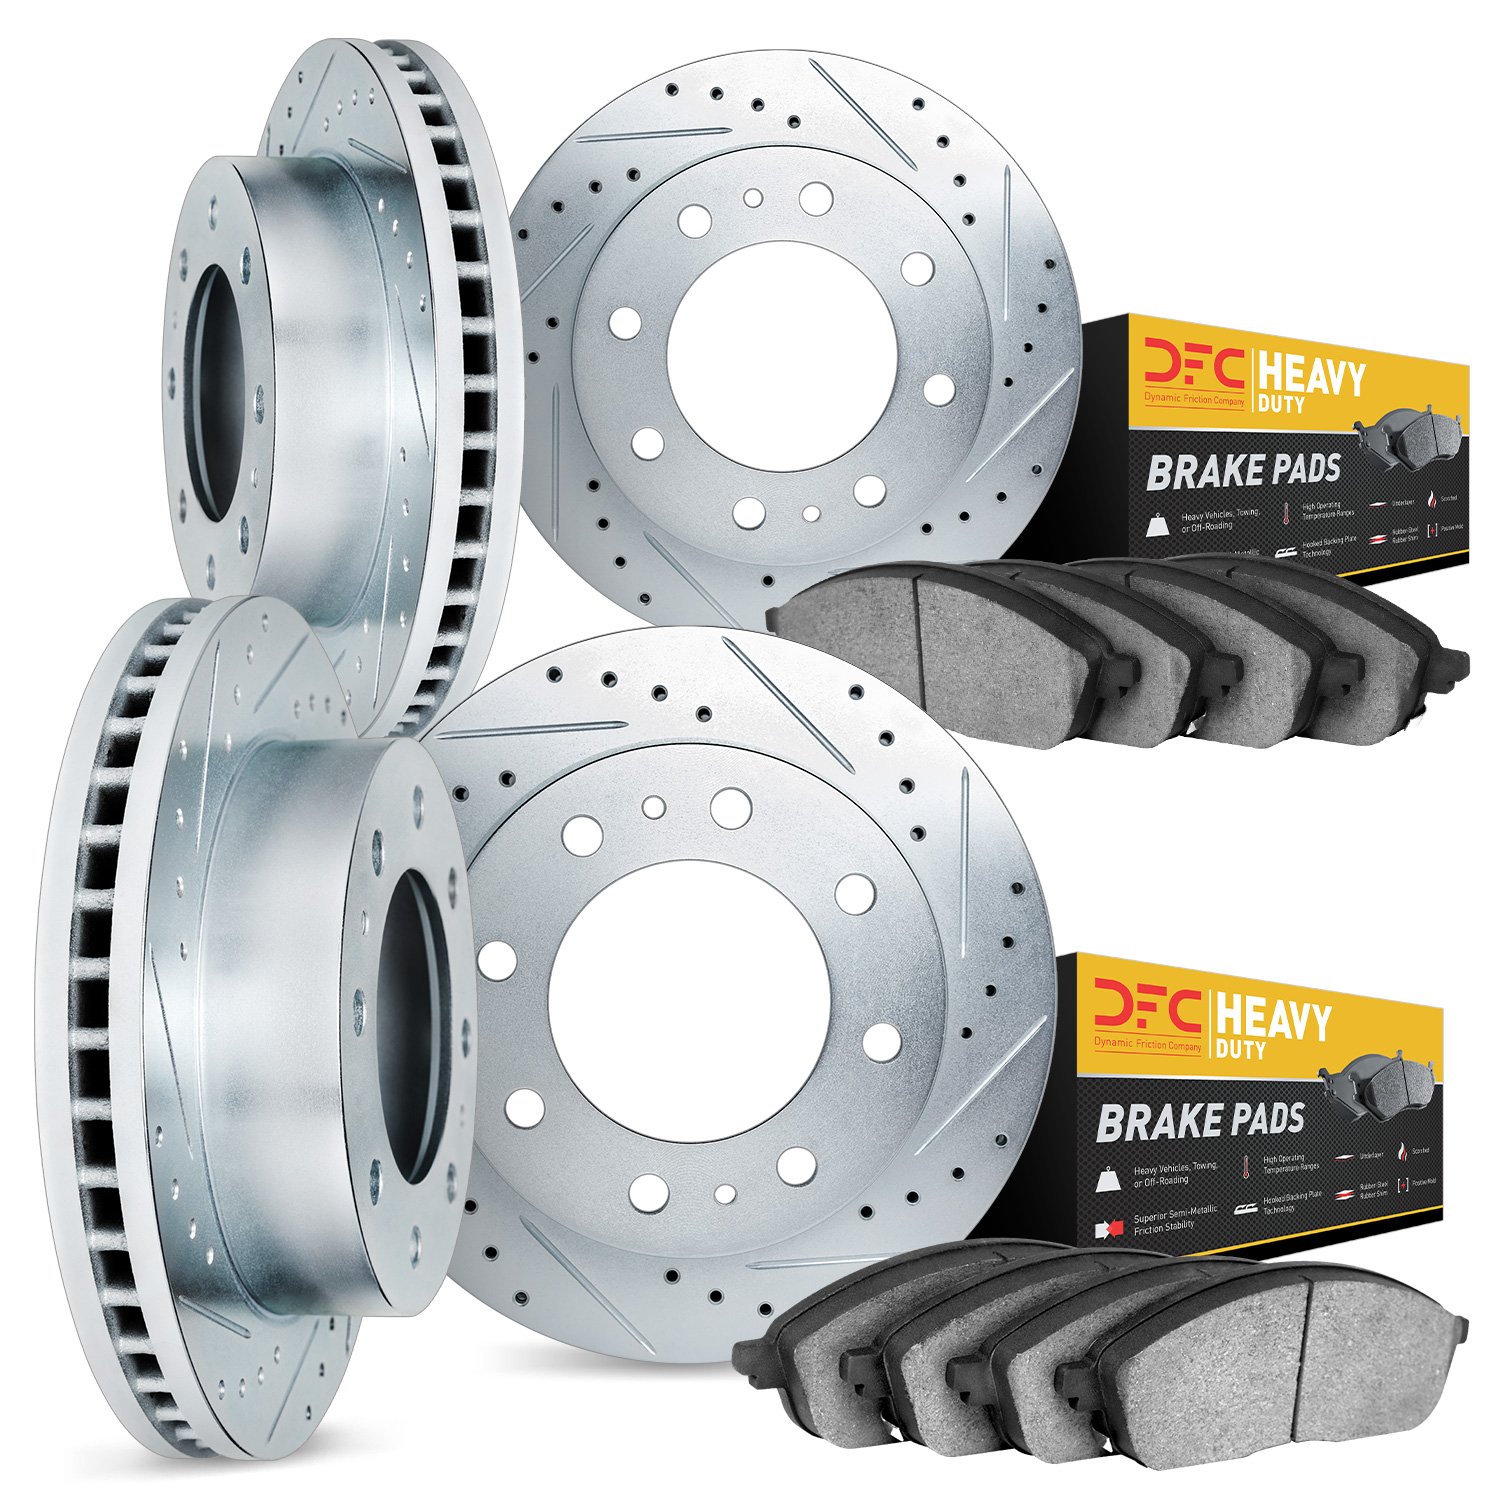 7204-99037 Drilled/Slotted Rotors w/Heavy-Duty Brake Pads Kit [Silver], 2000-2004 Ford/Lincoln/Mercury/Mazda, Position: Front an